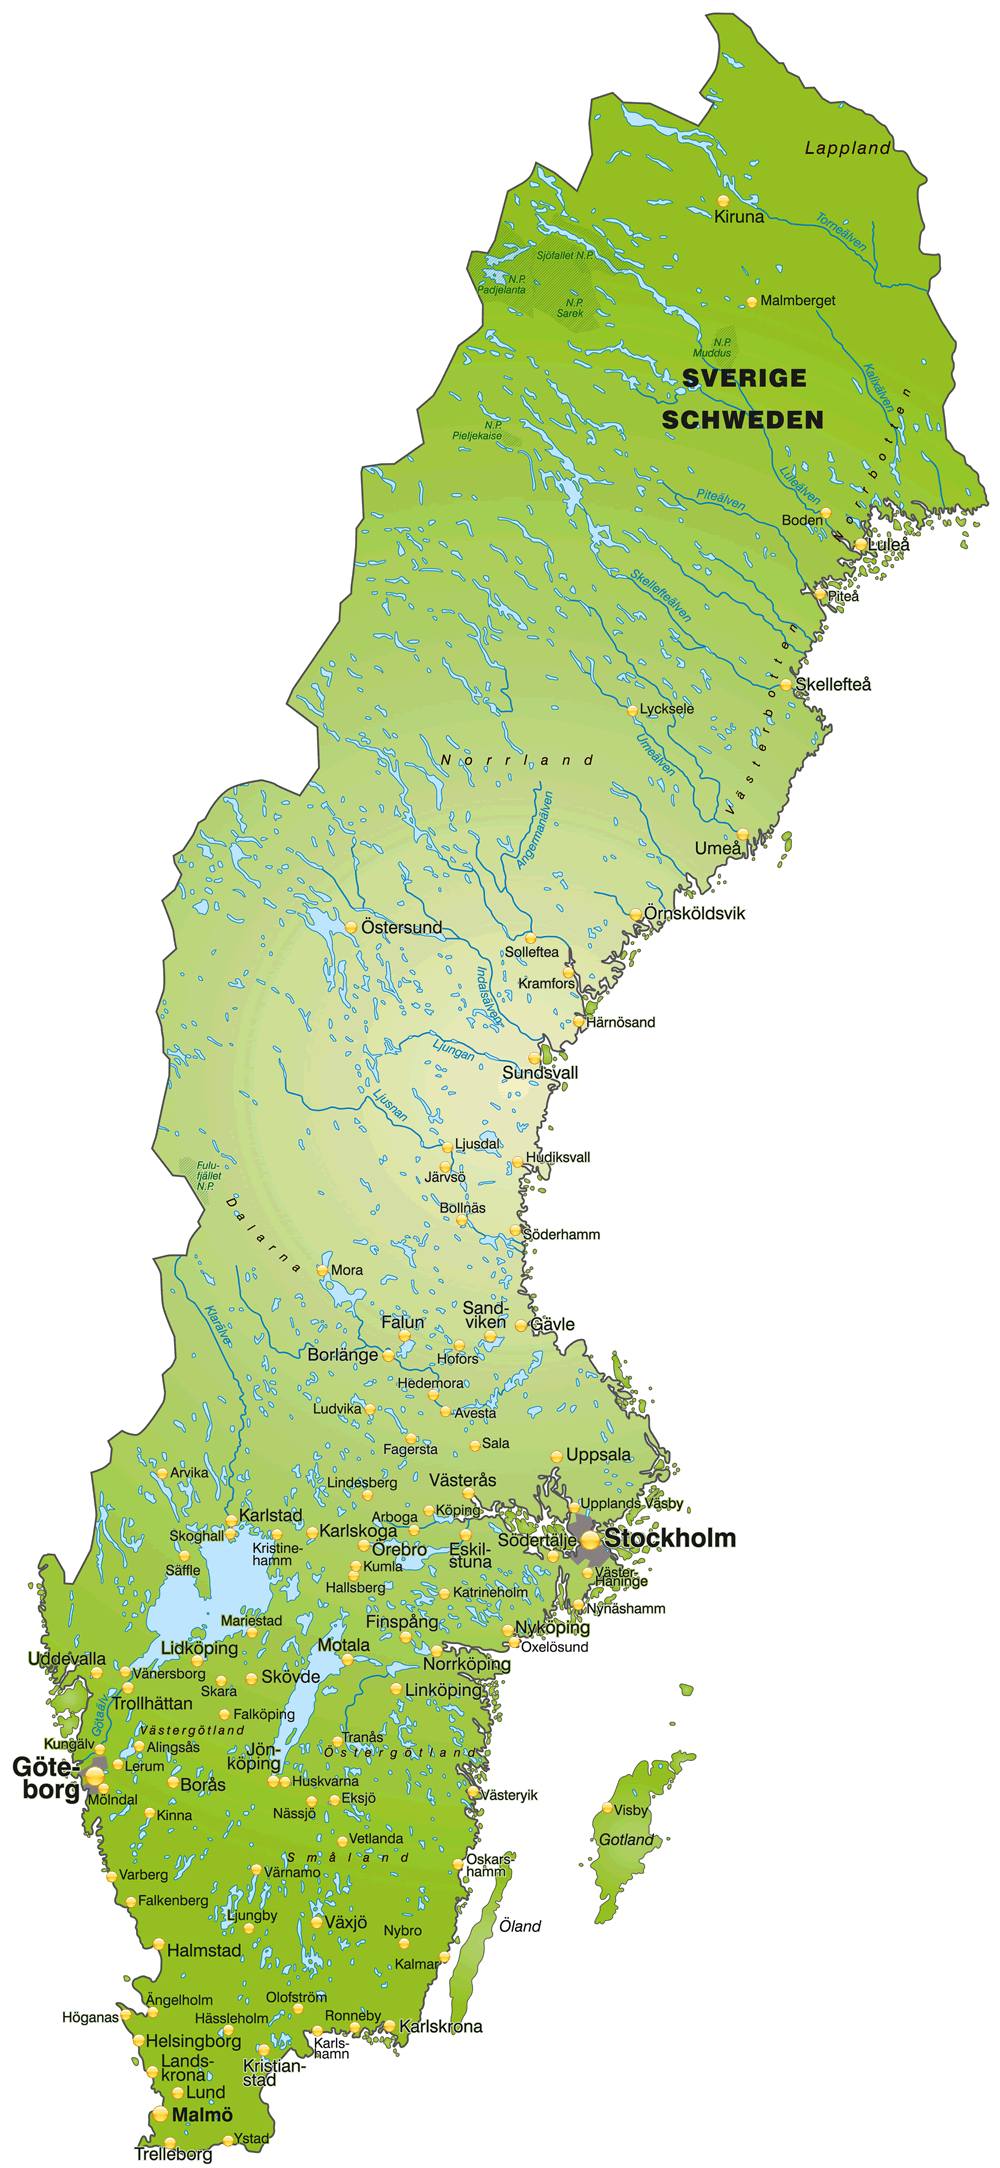 Sweden Map - Guide of the World